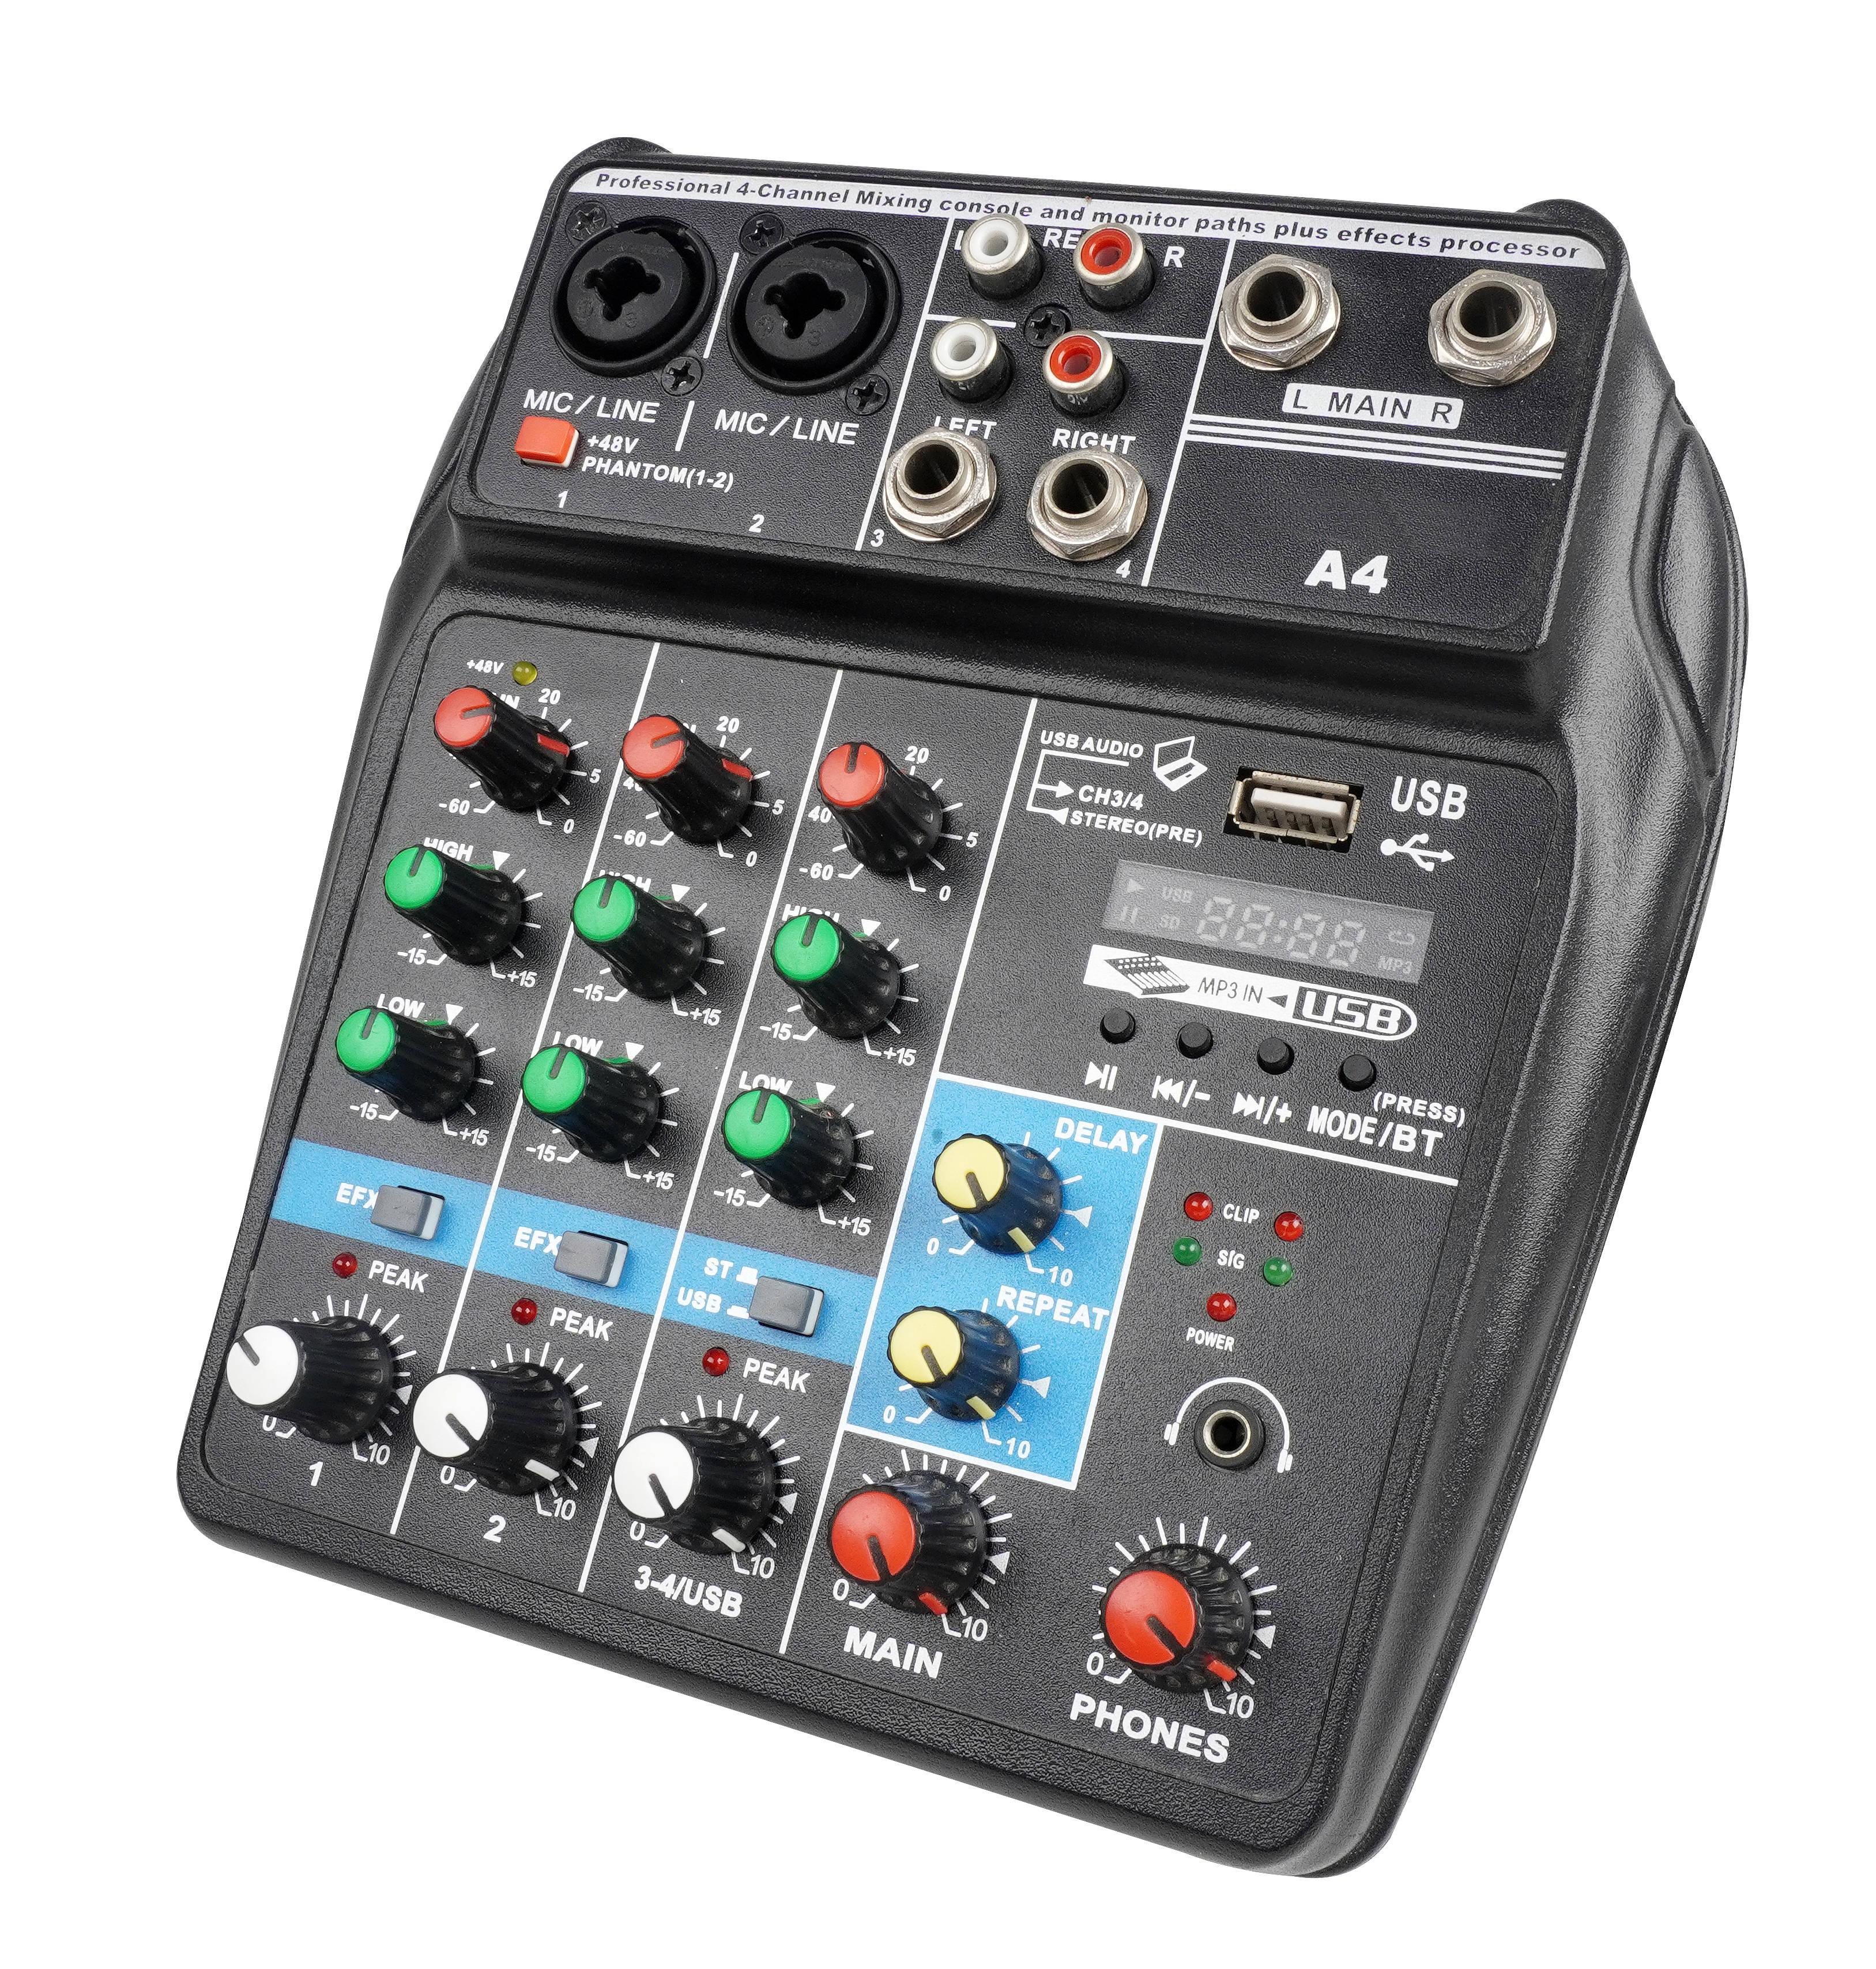 USB interface 4 channels N4 Mini audio Mixer perfect for home karaoke